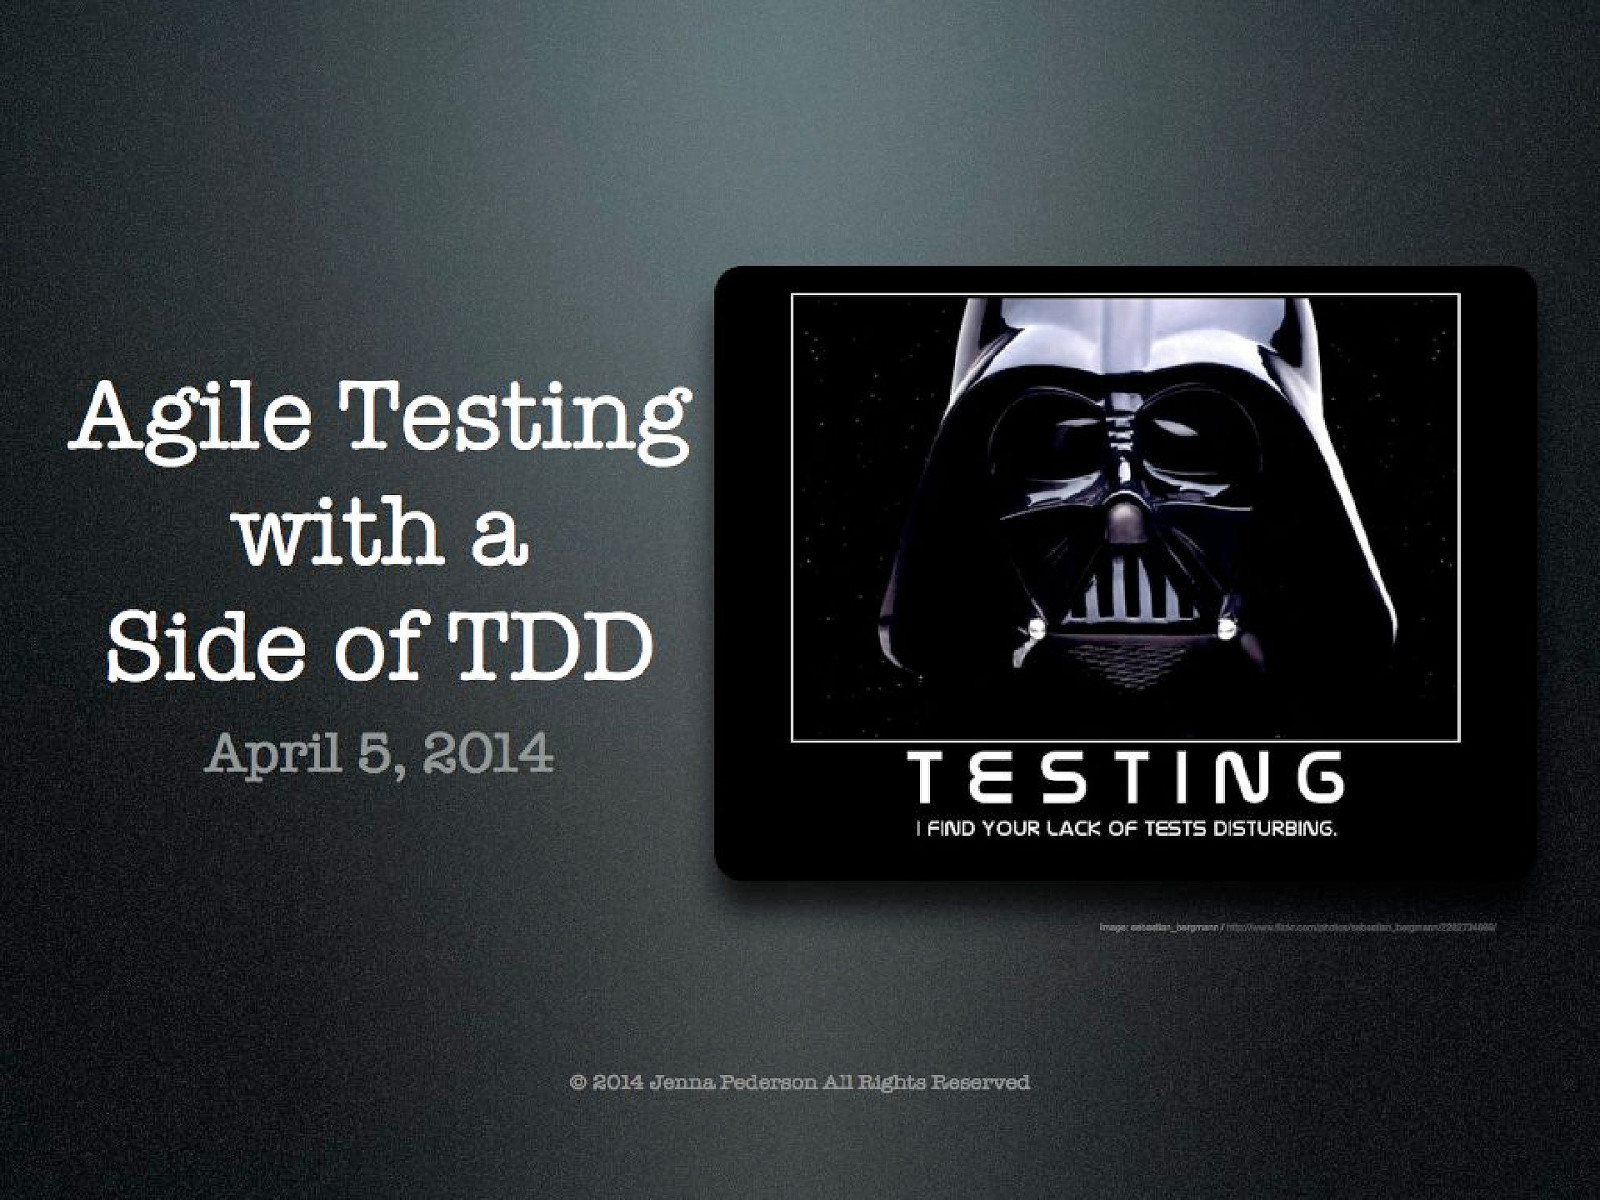 Agile Testing with a Side of TDD